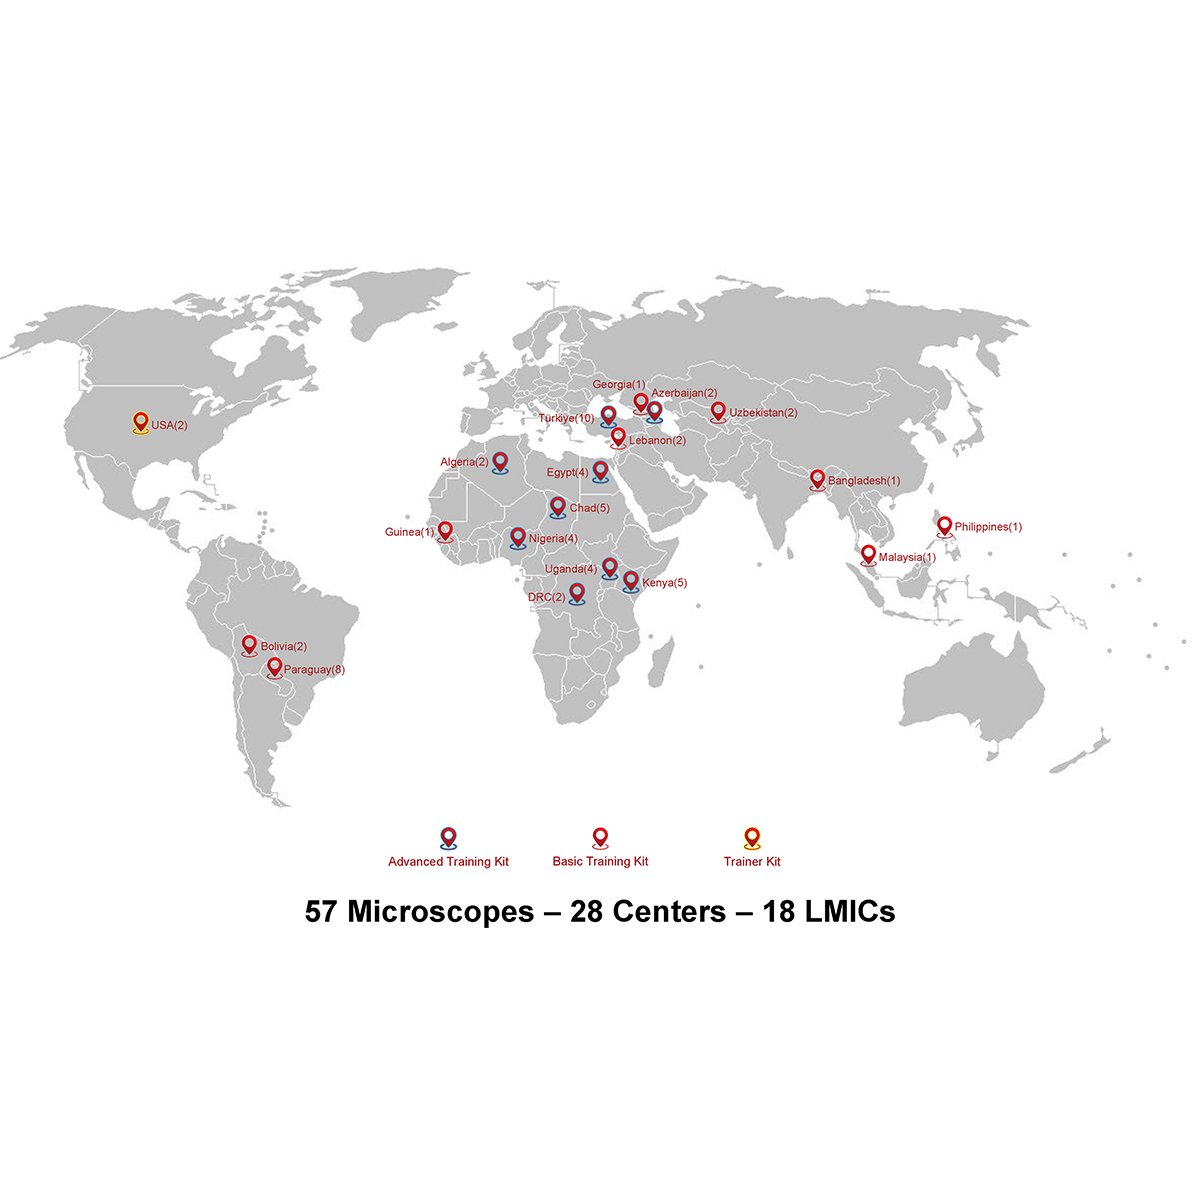 Explore the Madison Microneurosurgery Initiative, a pivotal step in advancing microsurgery training for low- and middle-income countries at UW, offering free training to healthcare professionals in underserved areas and empowering lives at go.wisc.edu/8z1rha. #UWSMPH